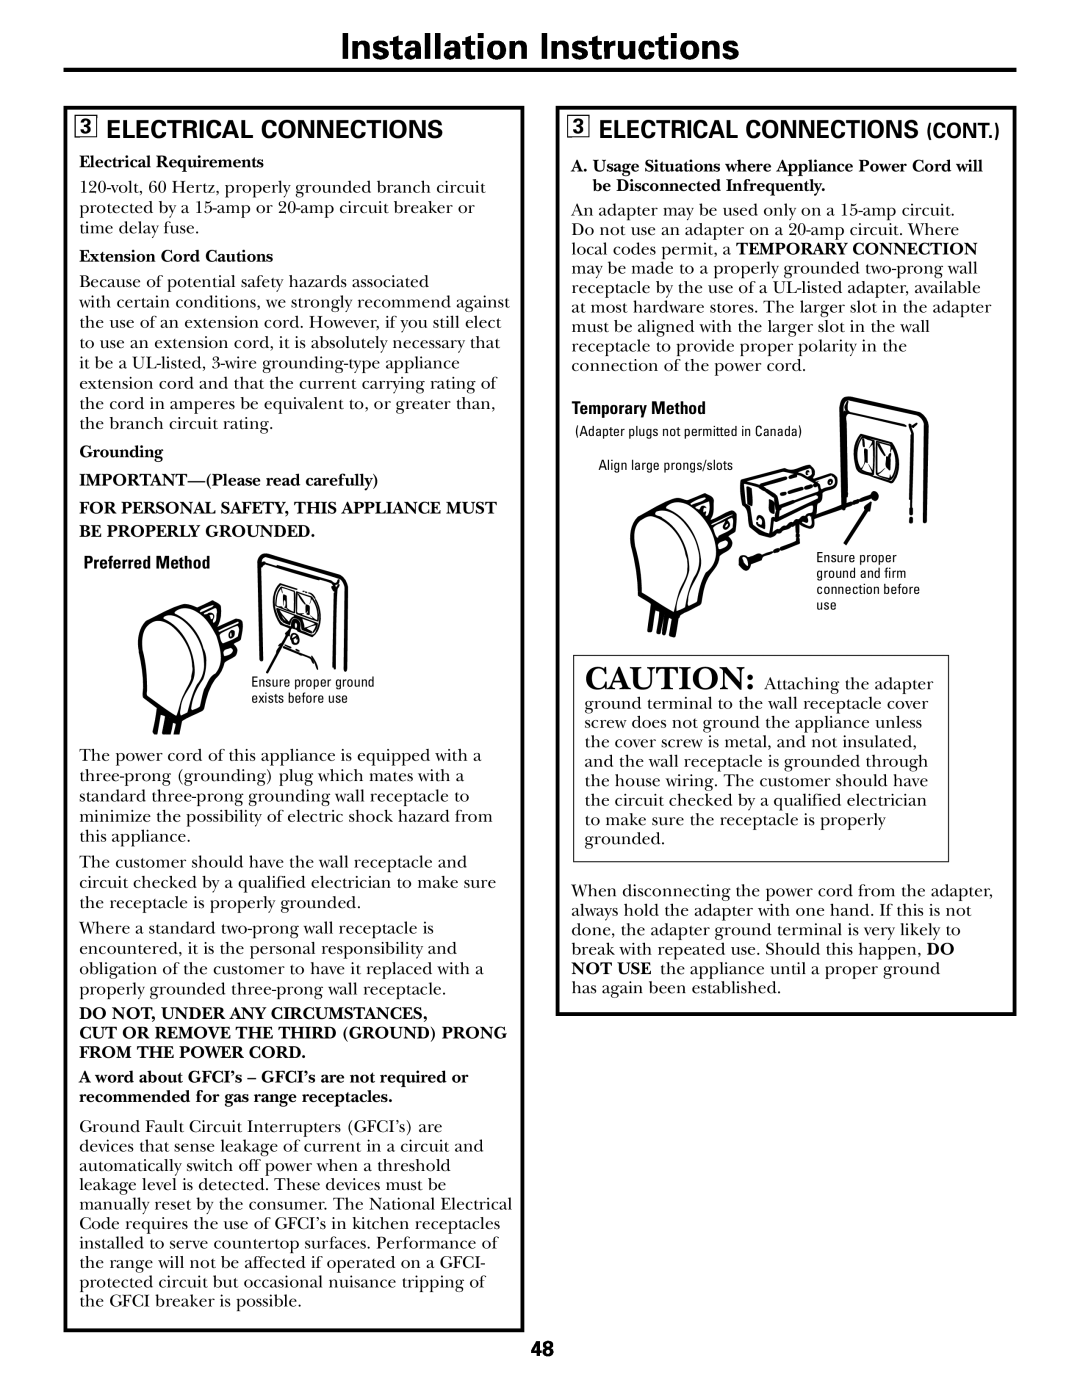 GE JGB920 Electrical Connections Cont, Installation Instructions, Preferred Method, Temporary Method 